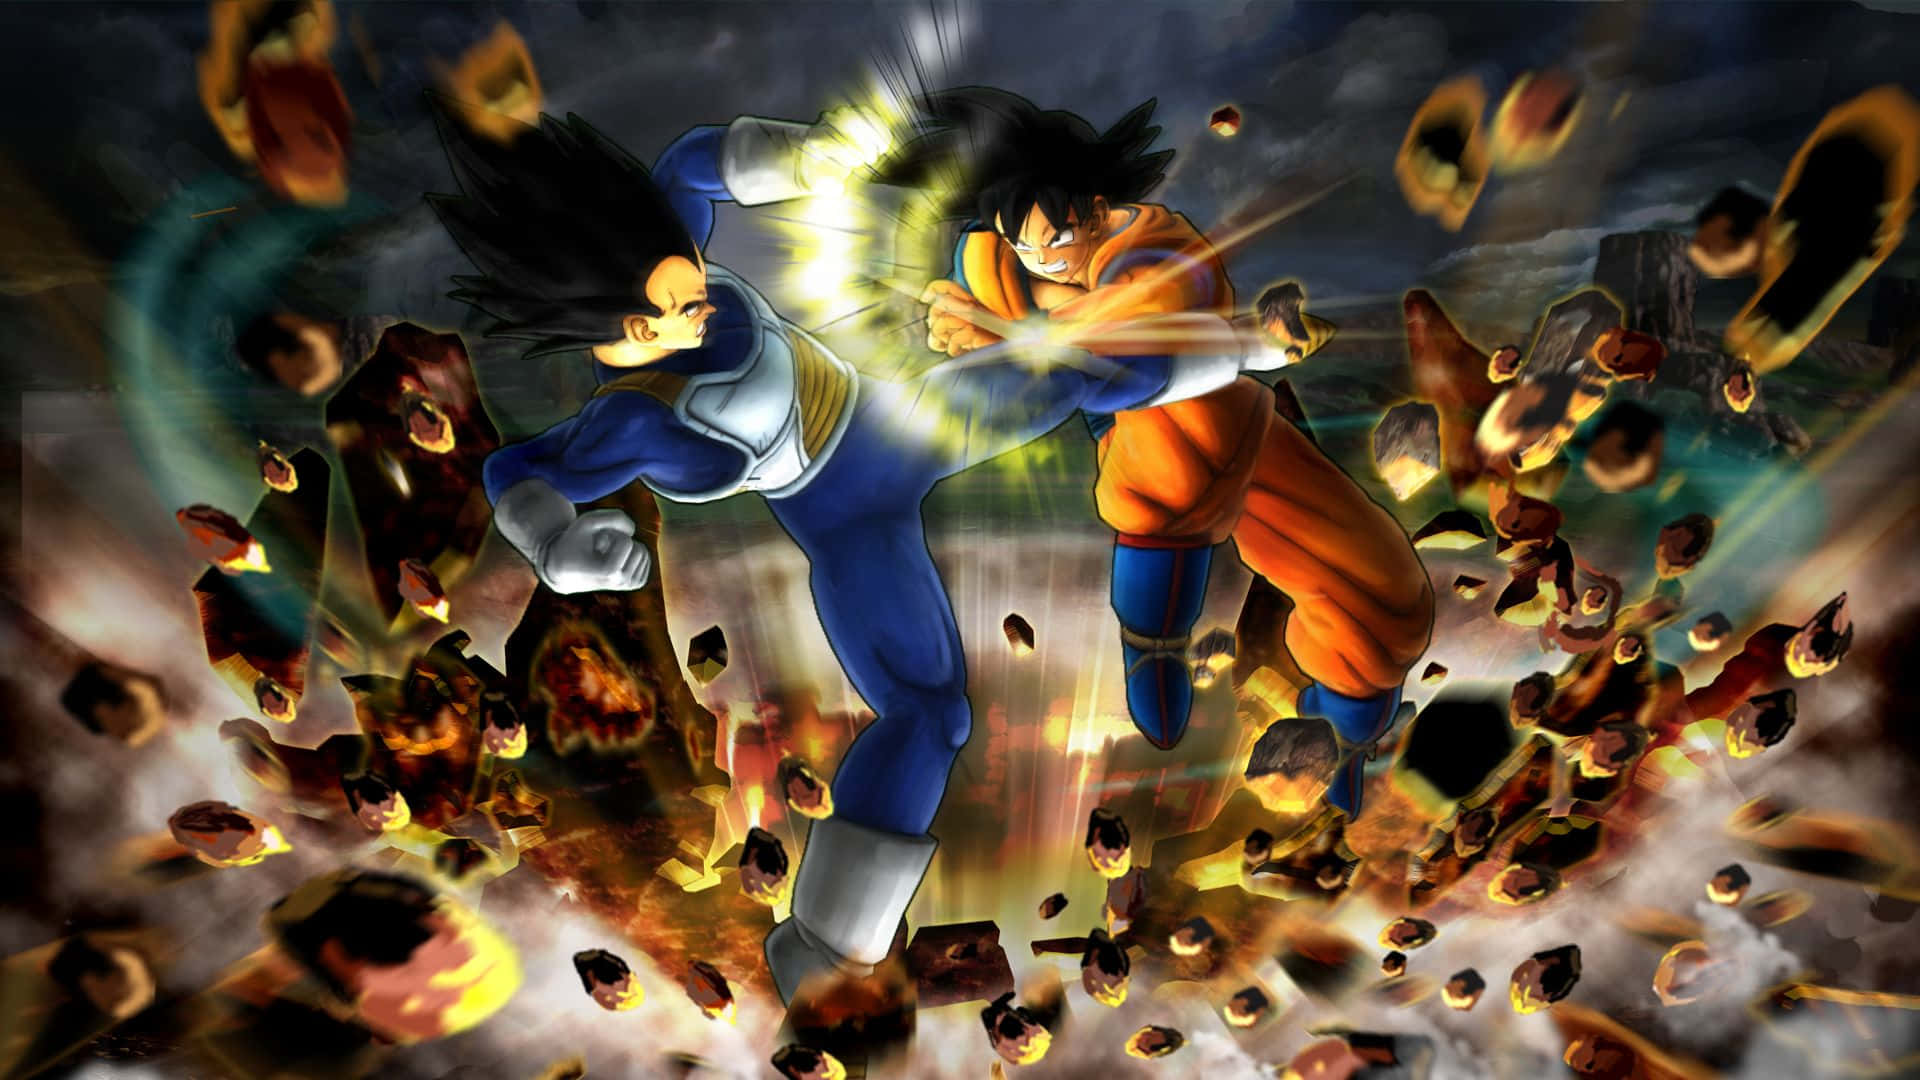 Anime Battle Pictures Wallpapers - Wallpaper Cave